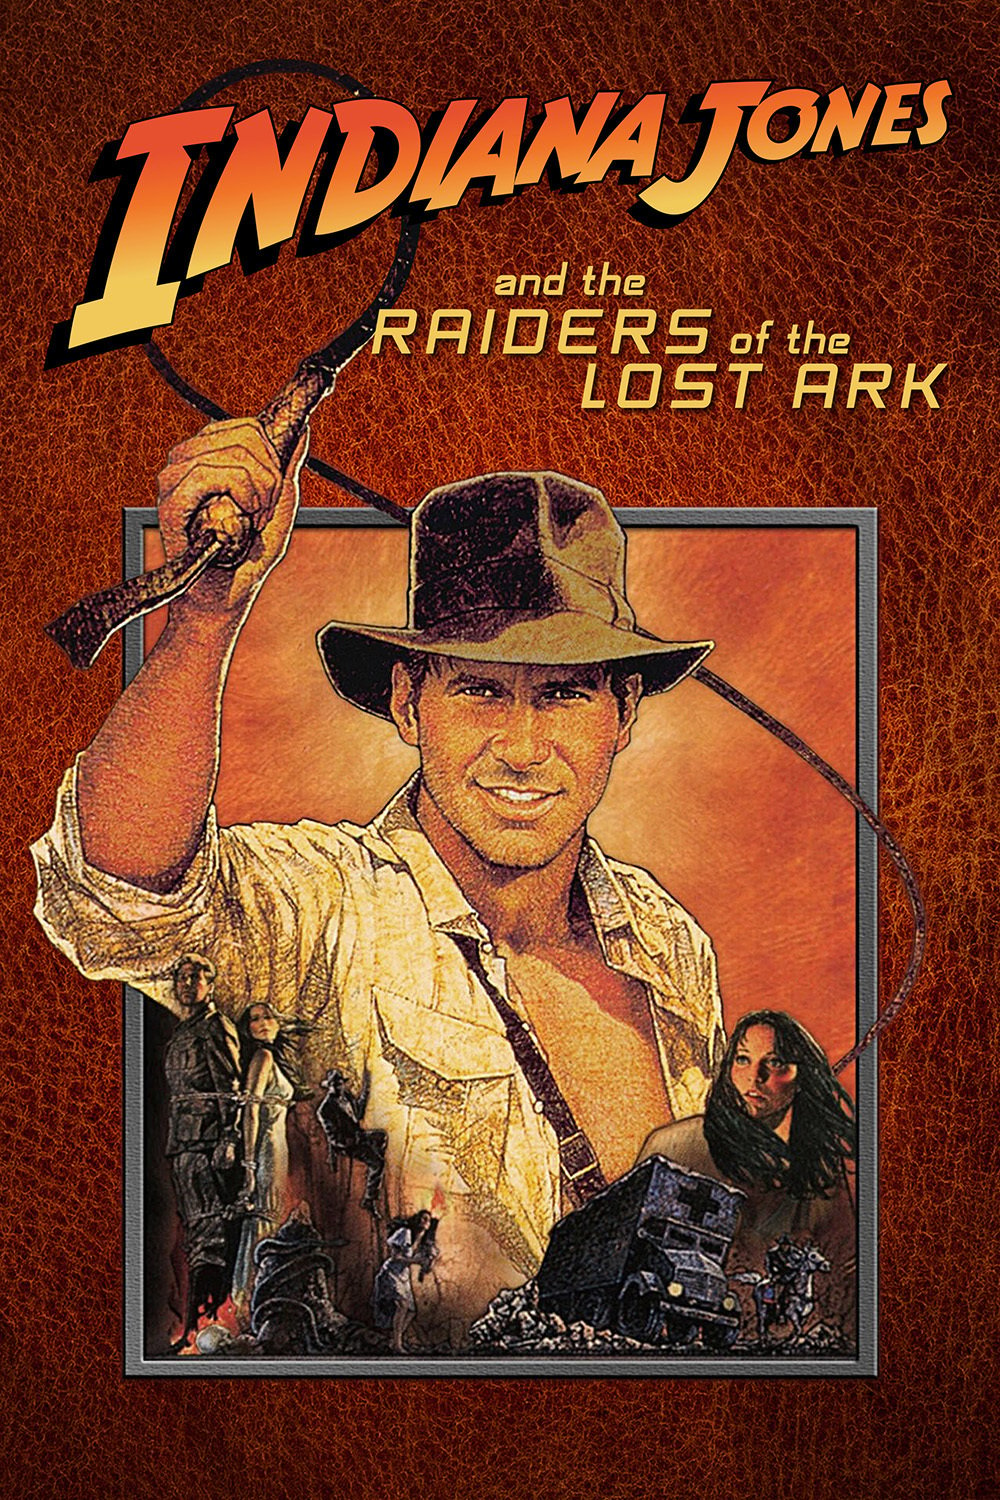 650x300px 84.51 KB Raiders Of The Lost Ark